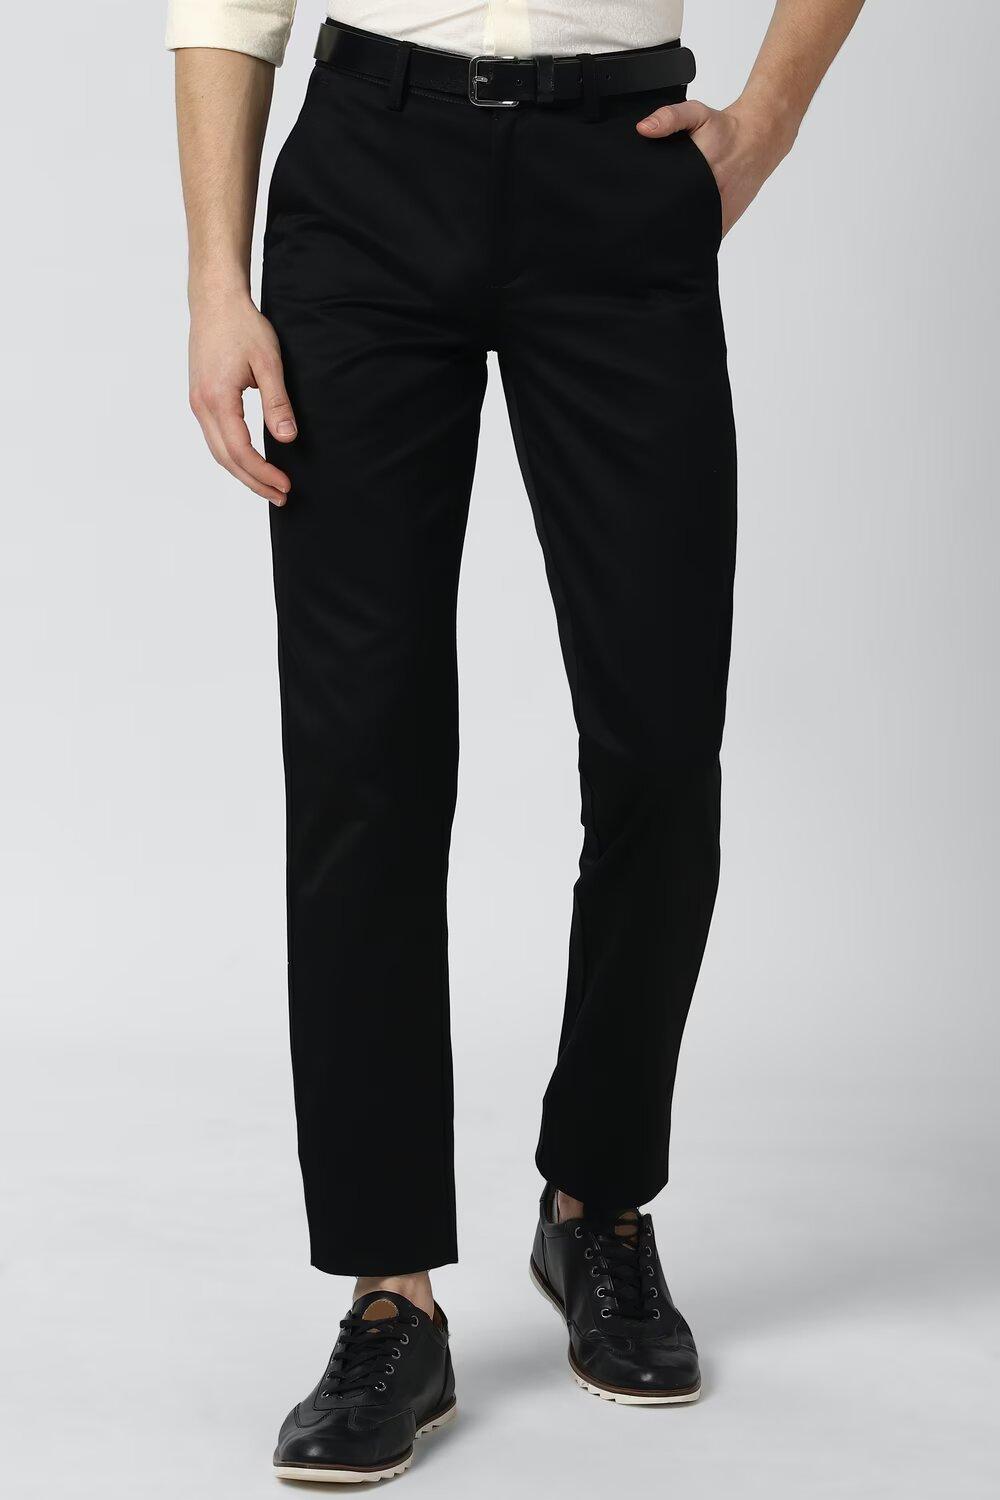 Peter England Men Black Solid good Slim Fit Casual Trousers